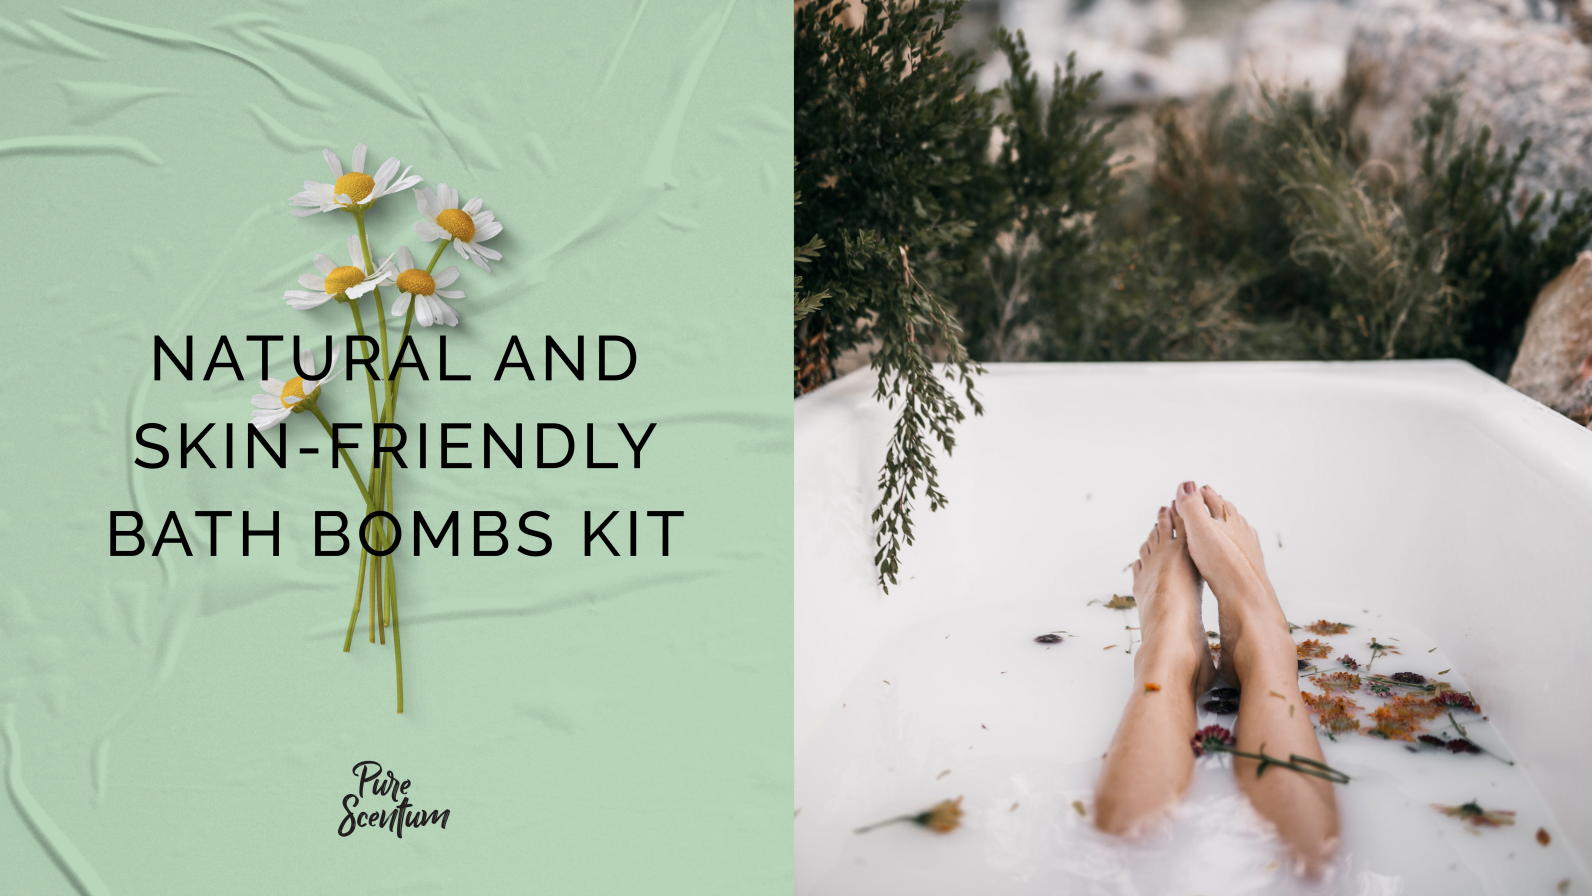 The Soothing Sanctuary: Exploring the Benefits of Non-Toxic Bath Bombs